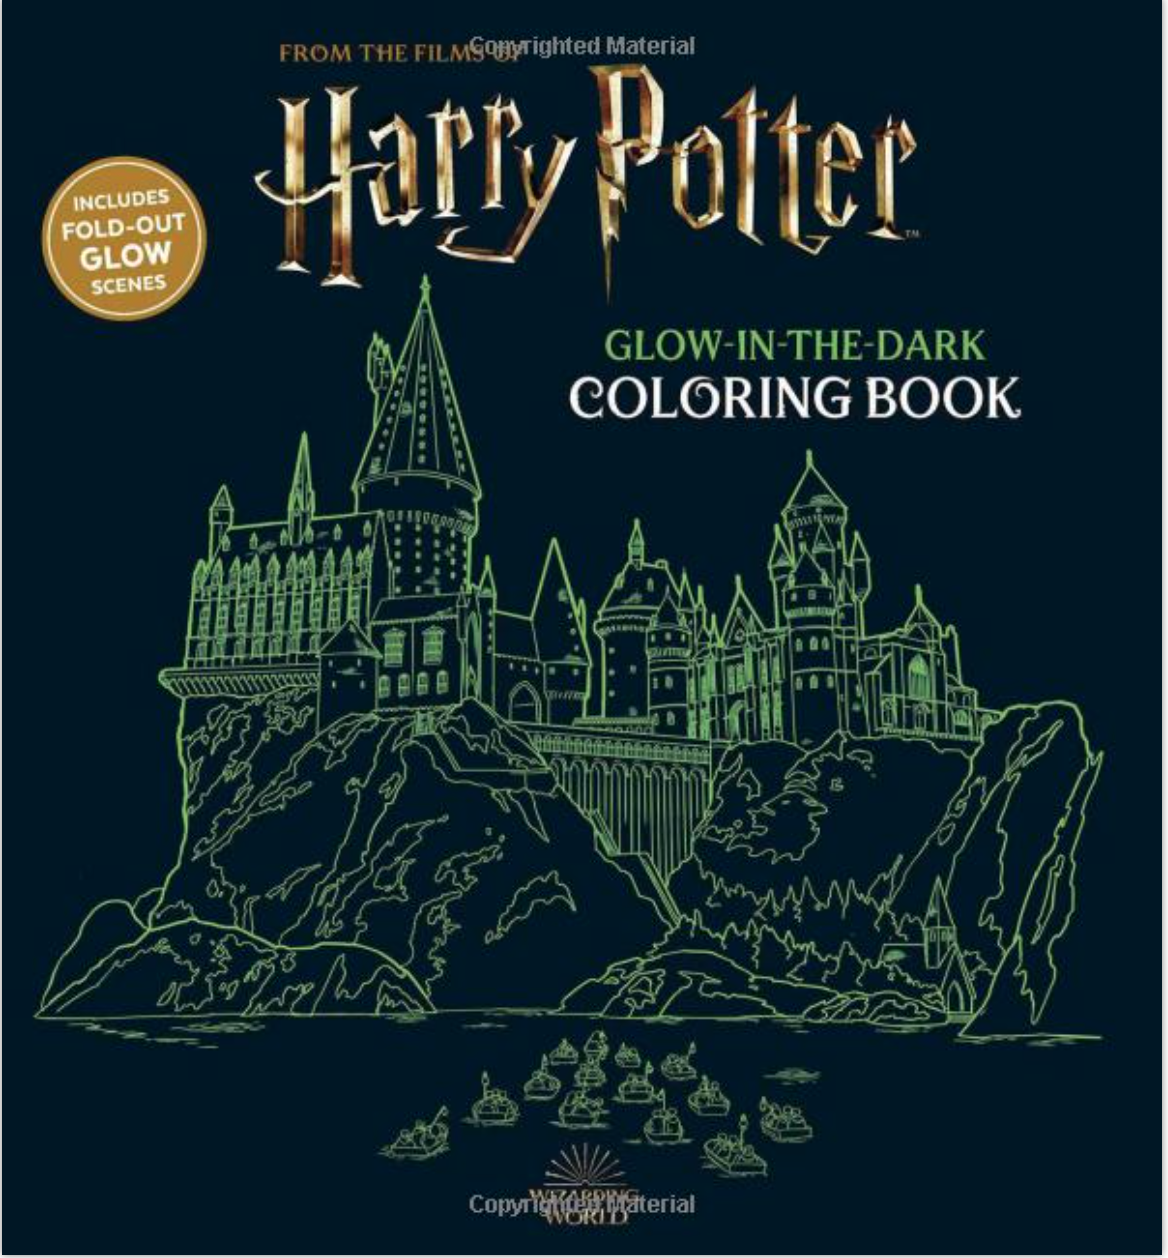 https://assets.mugglenet.com/wp-content/uploads/2022/11/Glow-in-the-dark-coloring-book.png